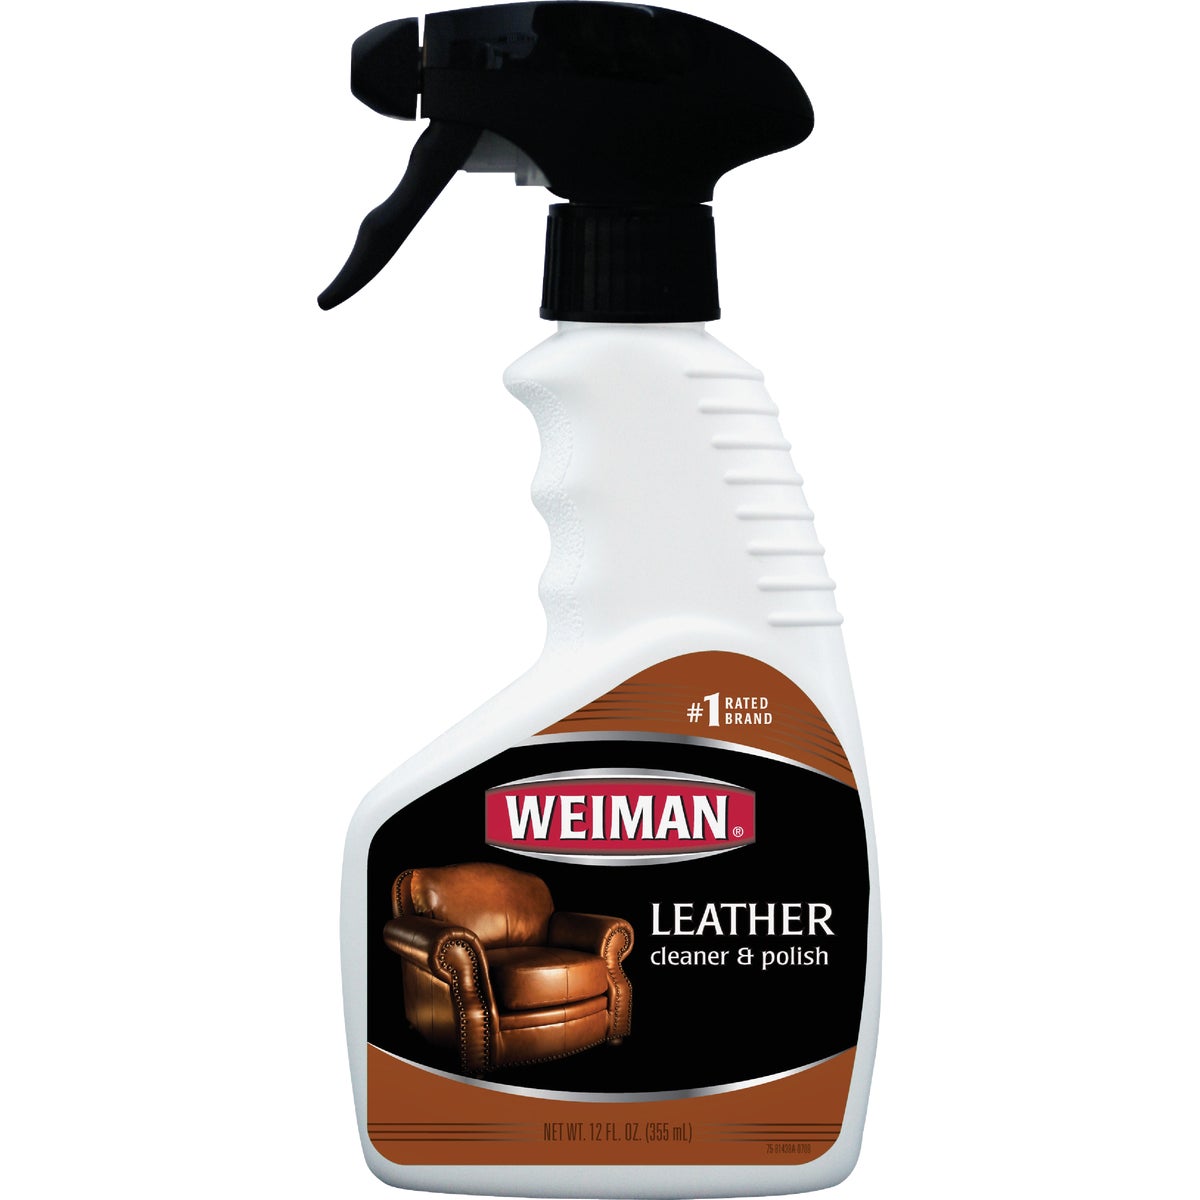 Weiman 12 Oz. Trigger Spray Leather Care Cleaner & Polish